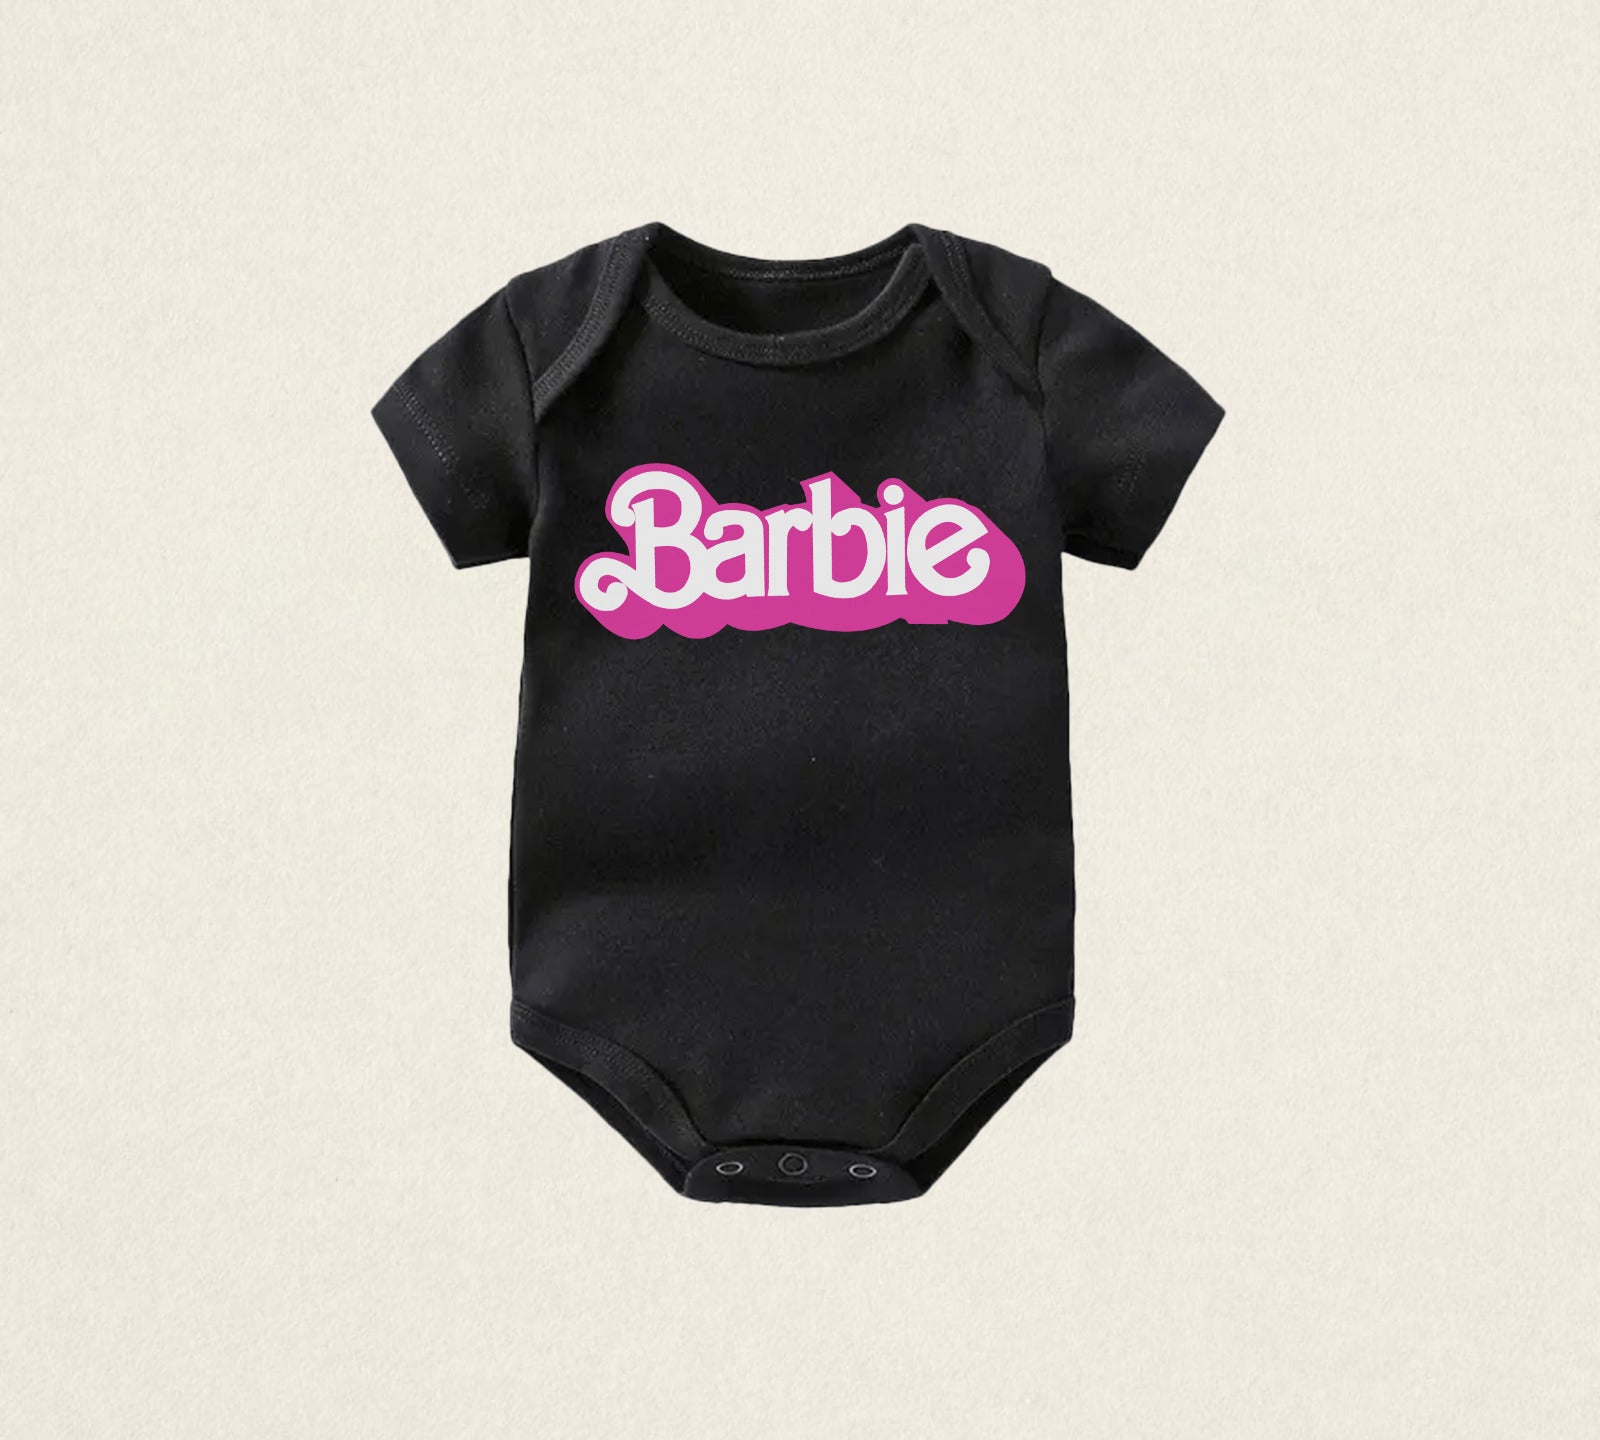 Cute Barbie Movie-Inspired Baby Bodysuit - Adorable & Comfy Attire